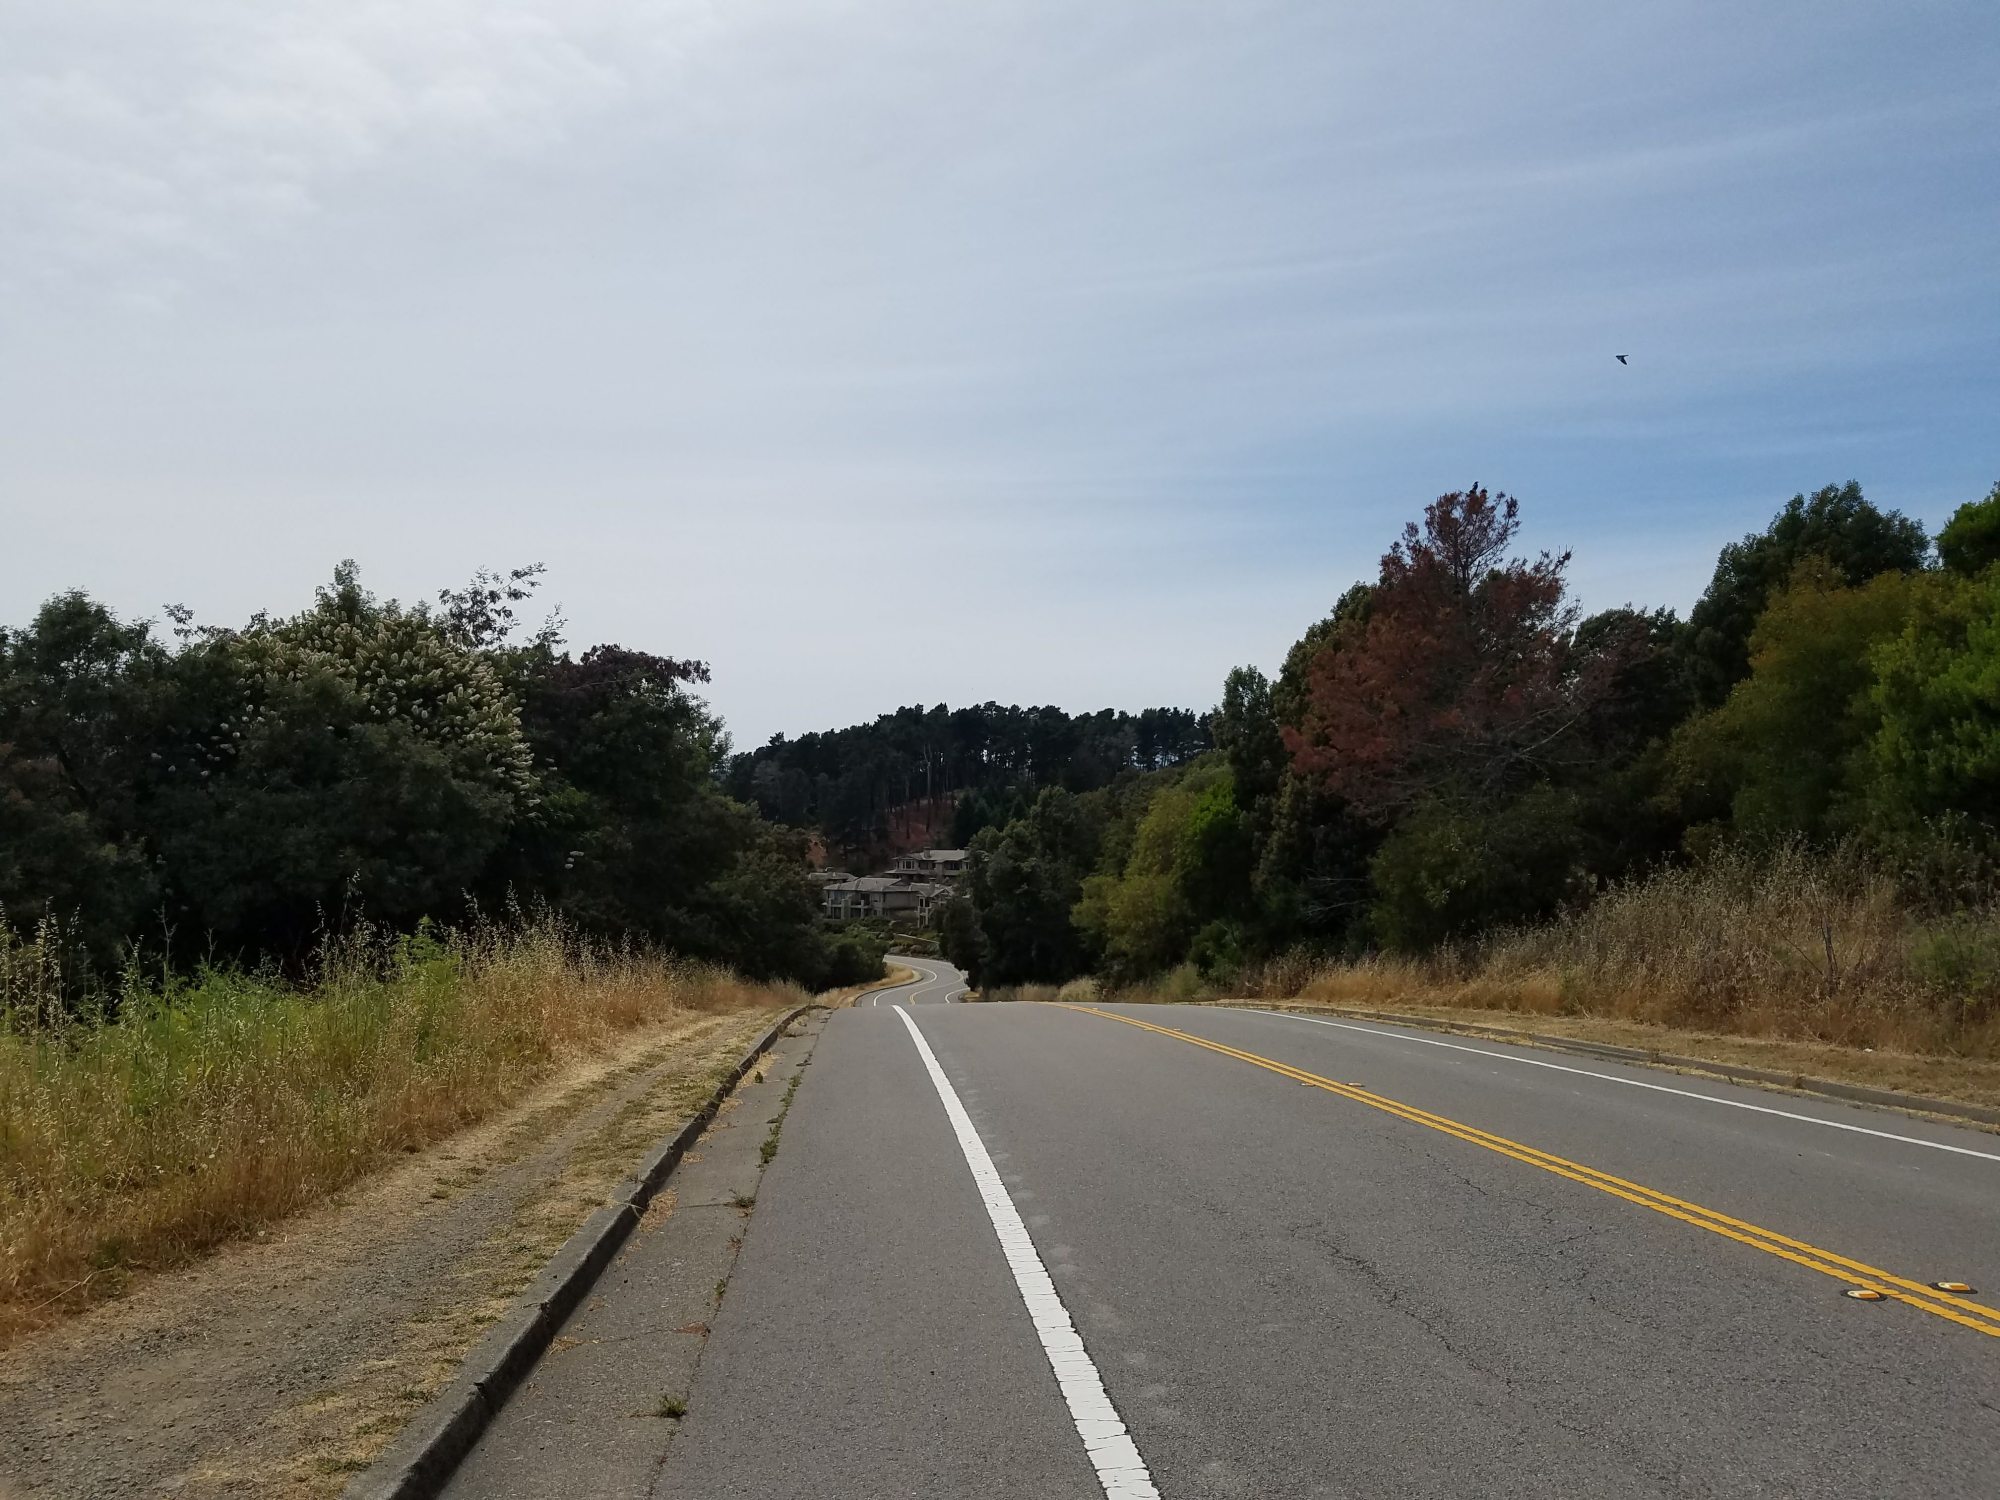 After cycling the golden gate bridge, this is part of the road from Sausalito to Tiburon.